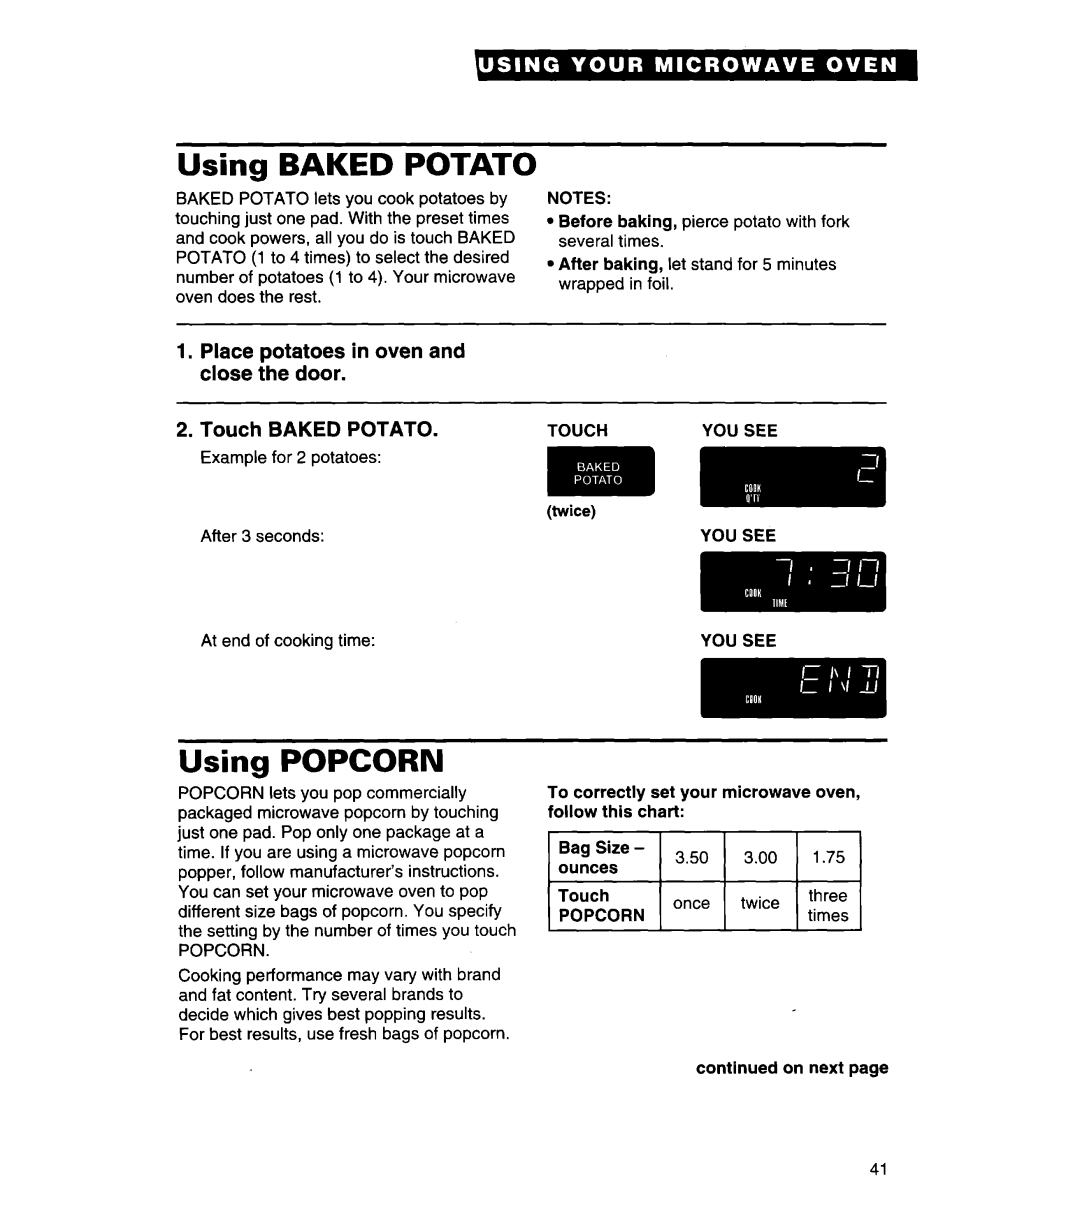 Whirlpool MH7130XE Using BAKED POTATO, Using POPCORN, Place potatoes in oven and close the door, Potato, Baked, miml 